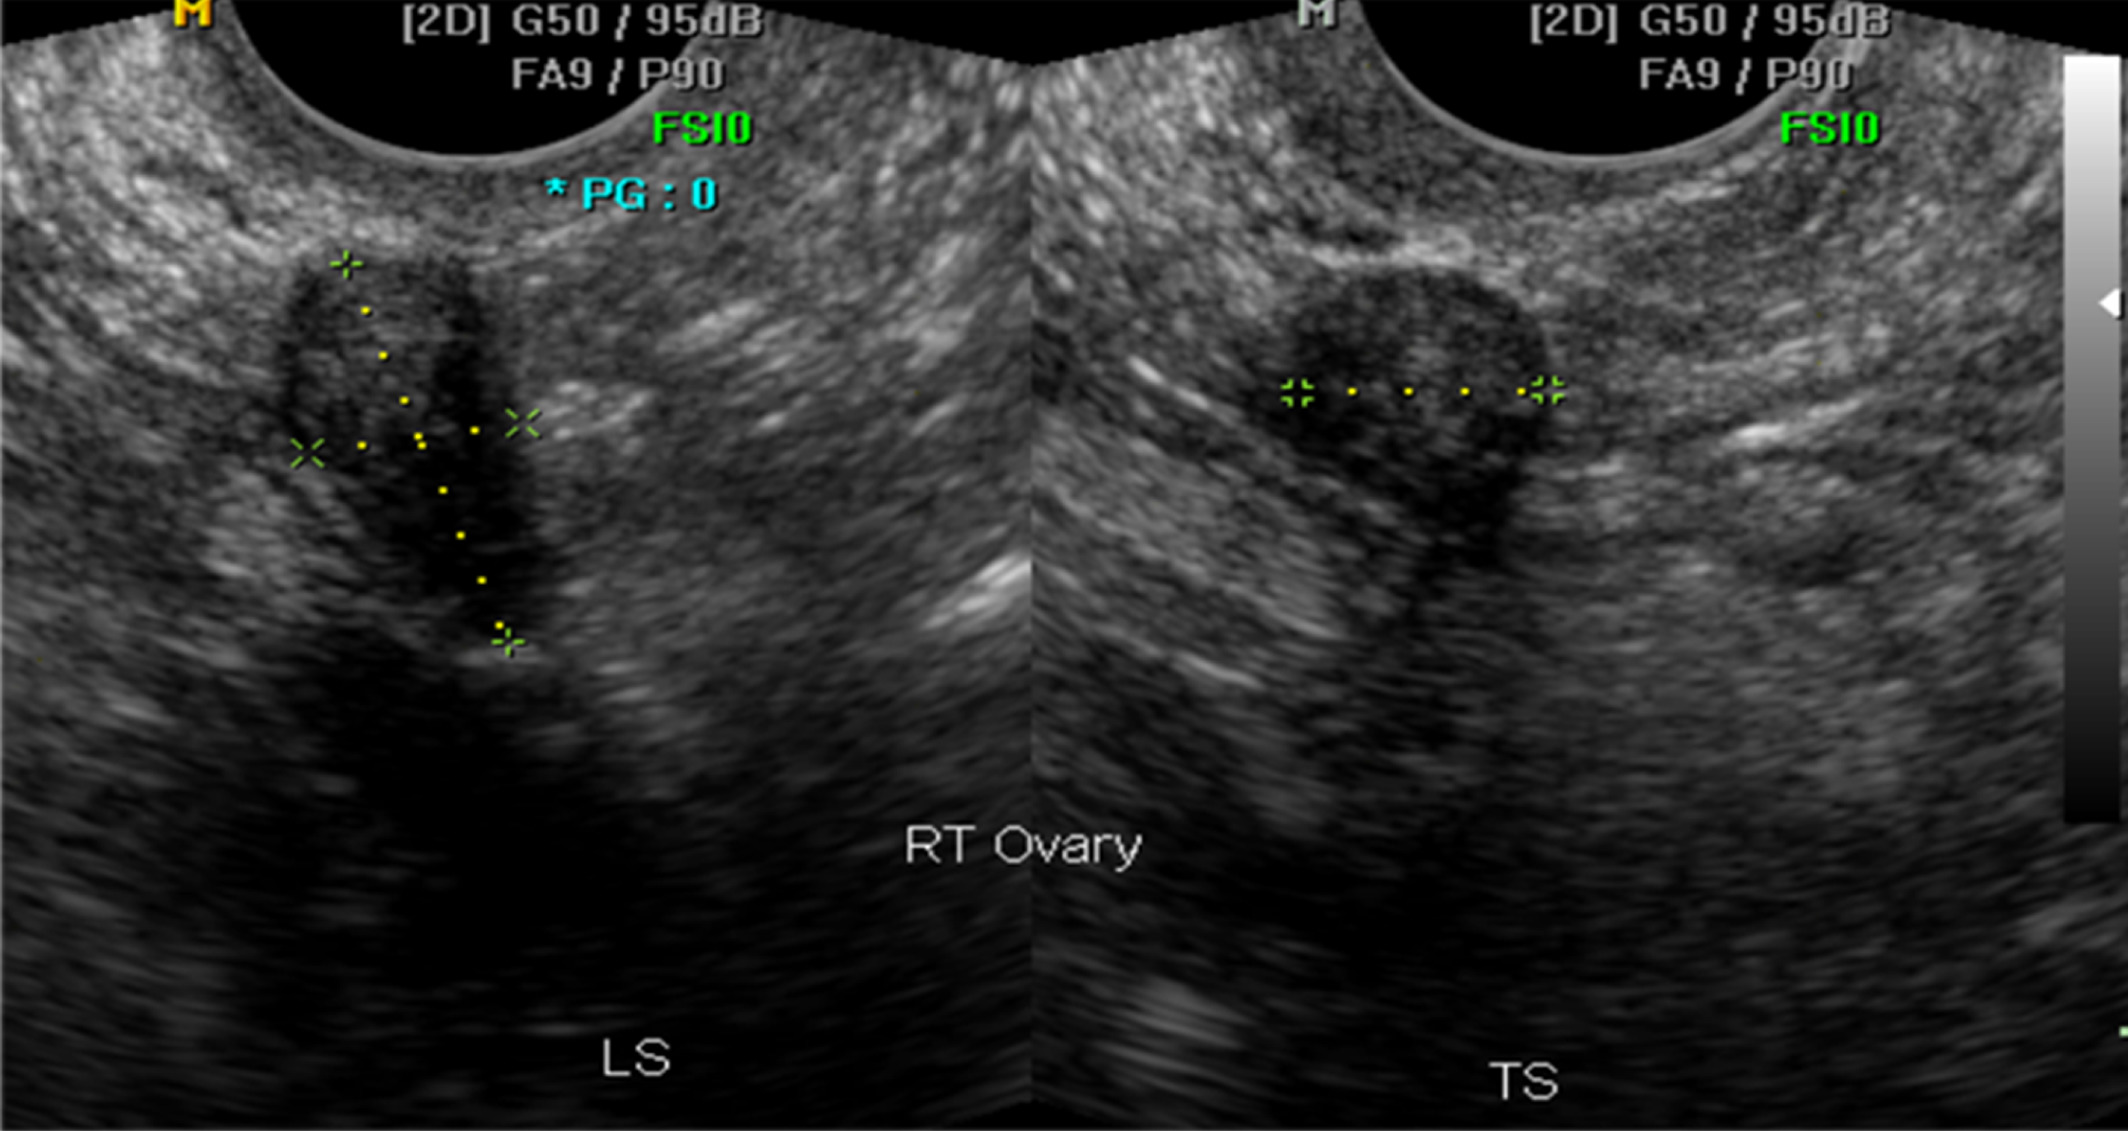 Why Is My Left Ovary Not Visible On Ultrasound